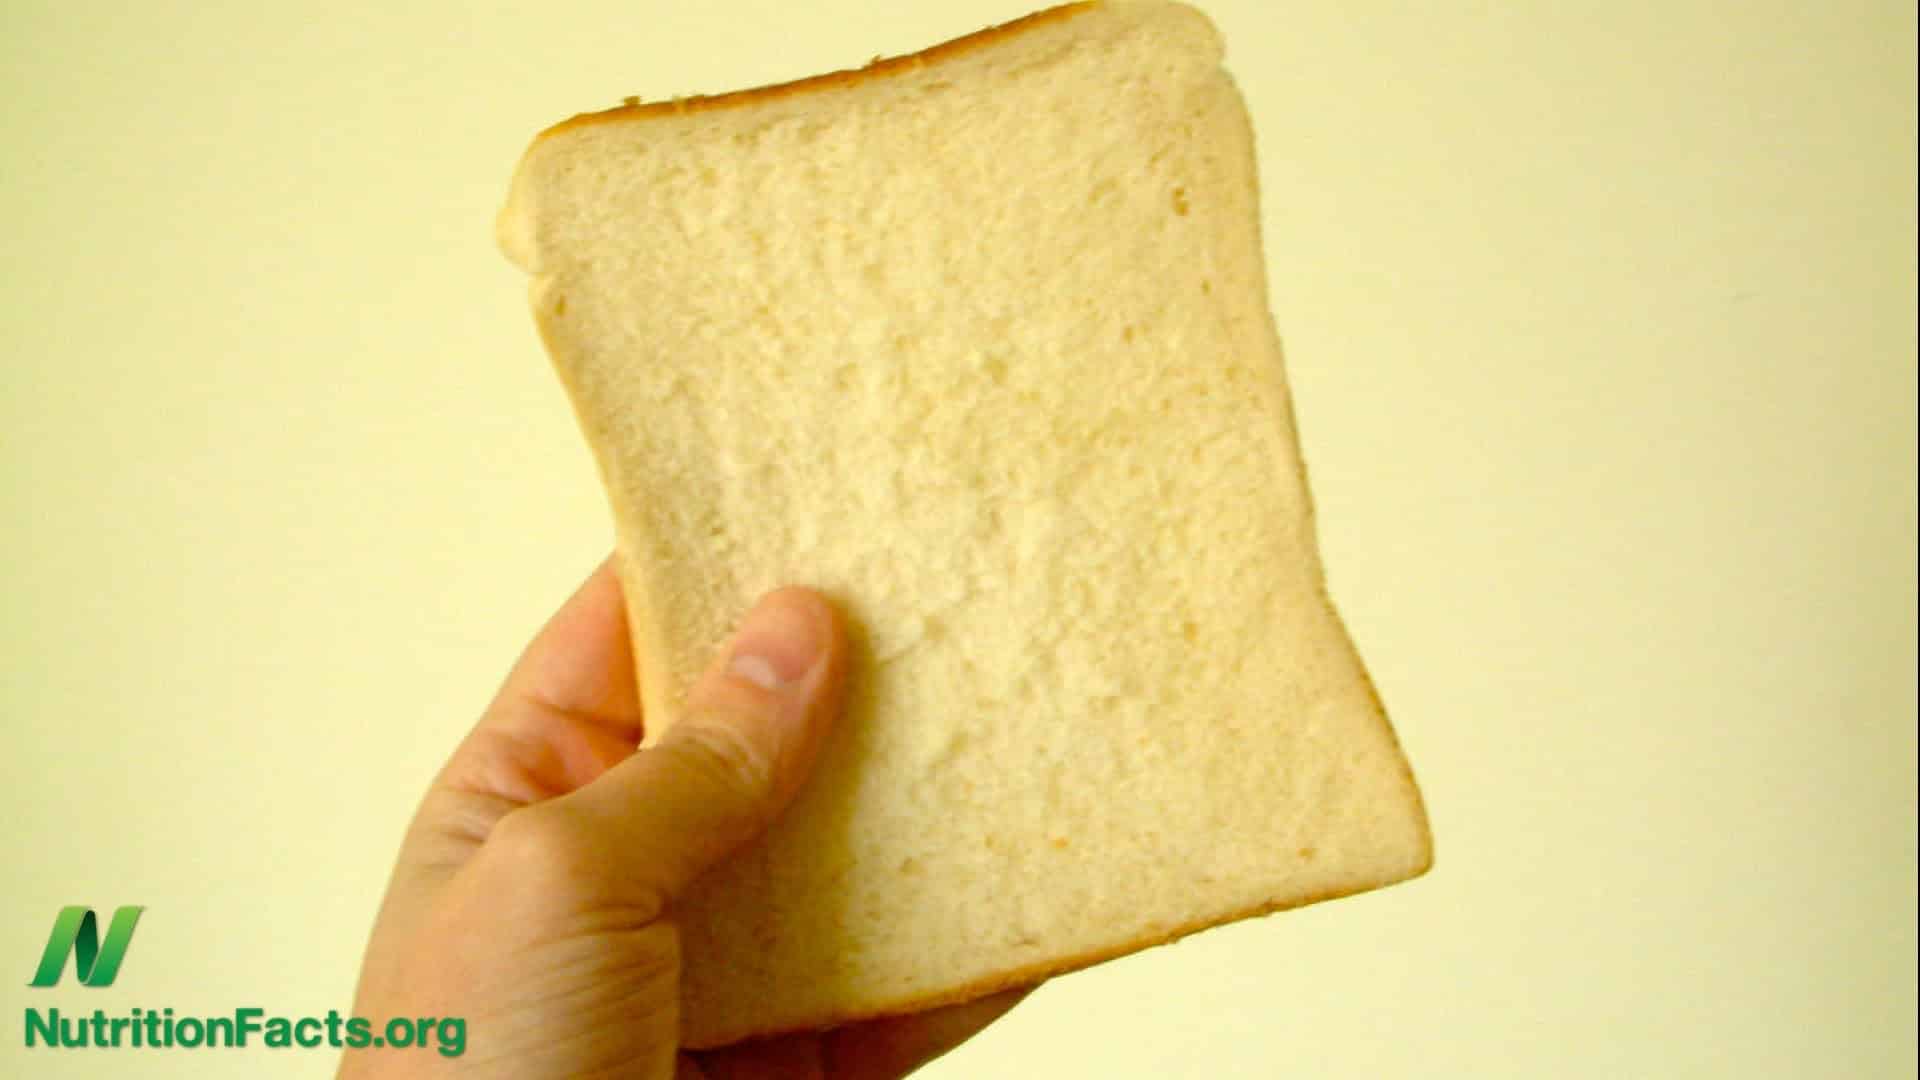 Is White Bread Good for You?